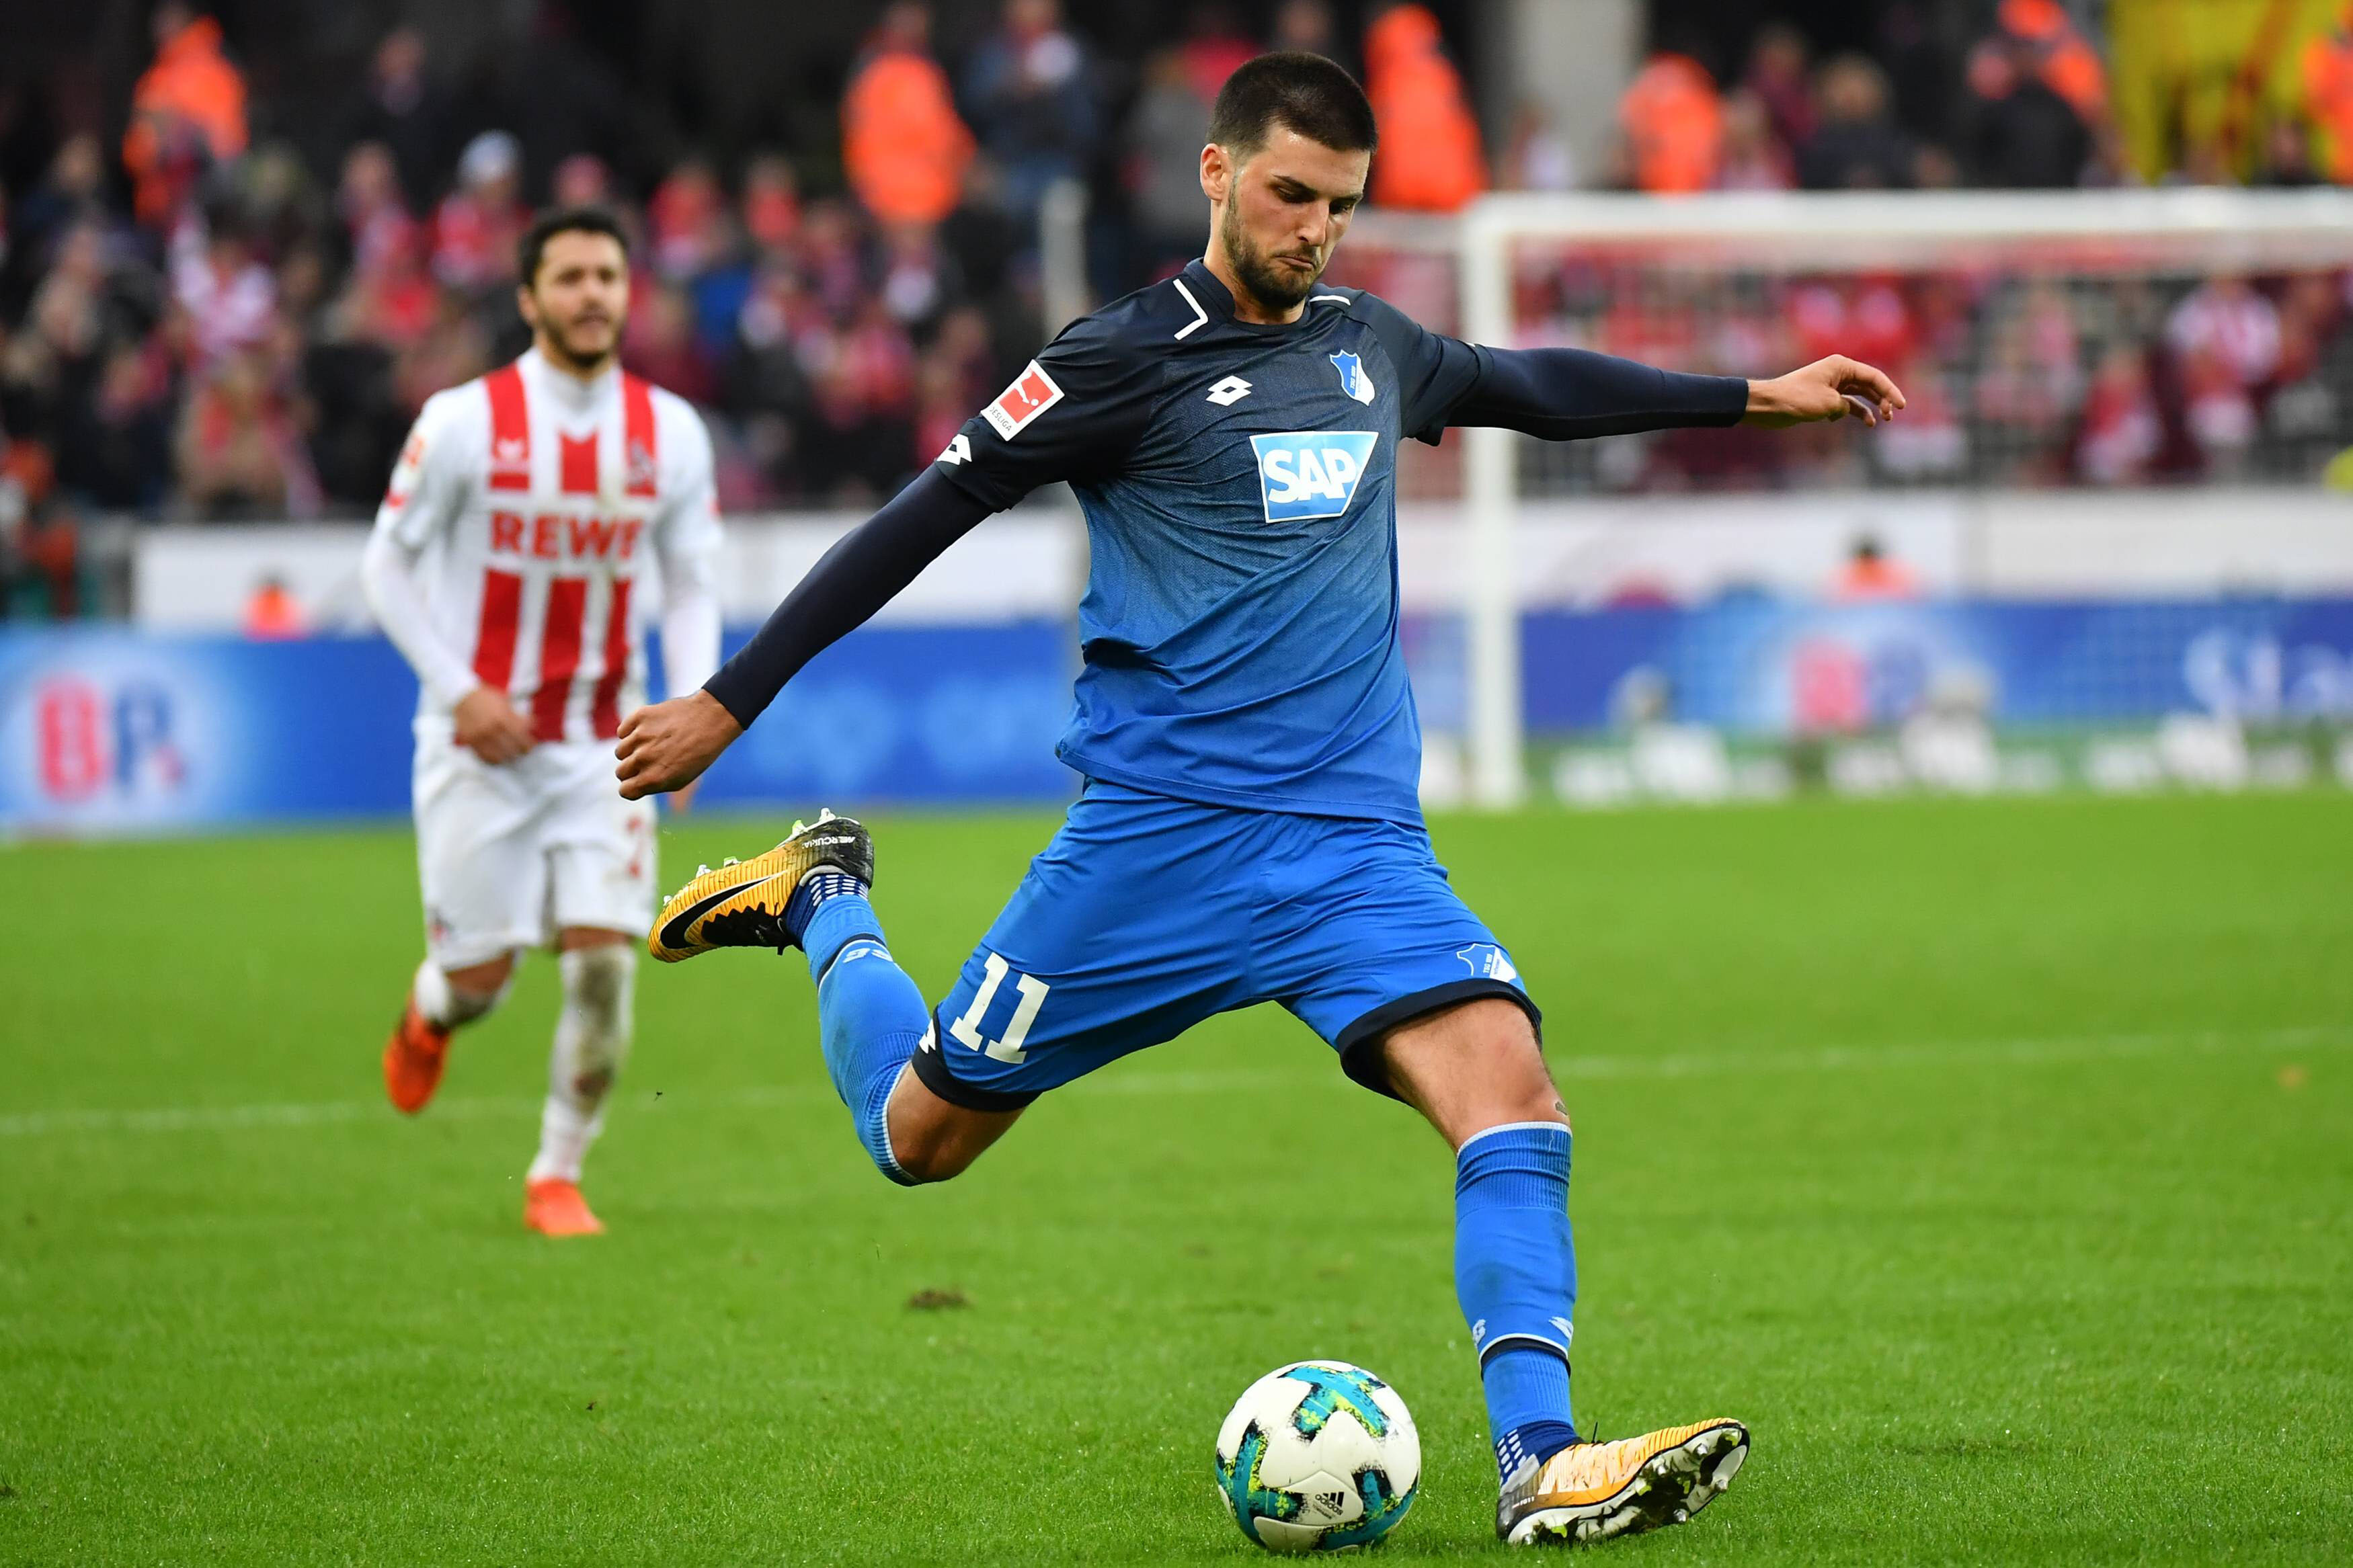 Florian Grillitsch: "We want to reach the knockouts" » TSG Hoffenheim